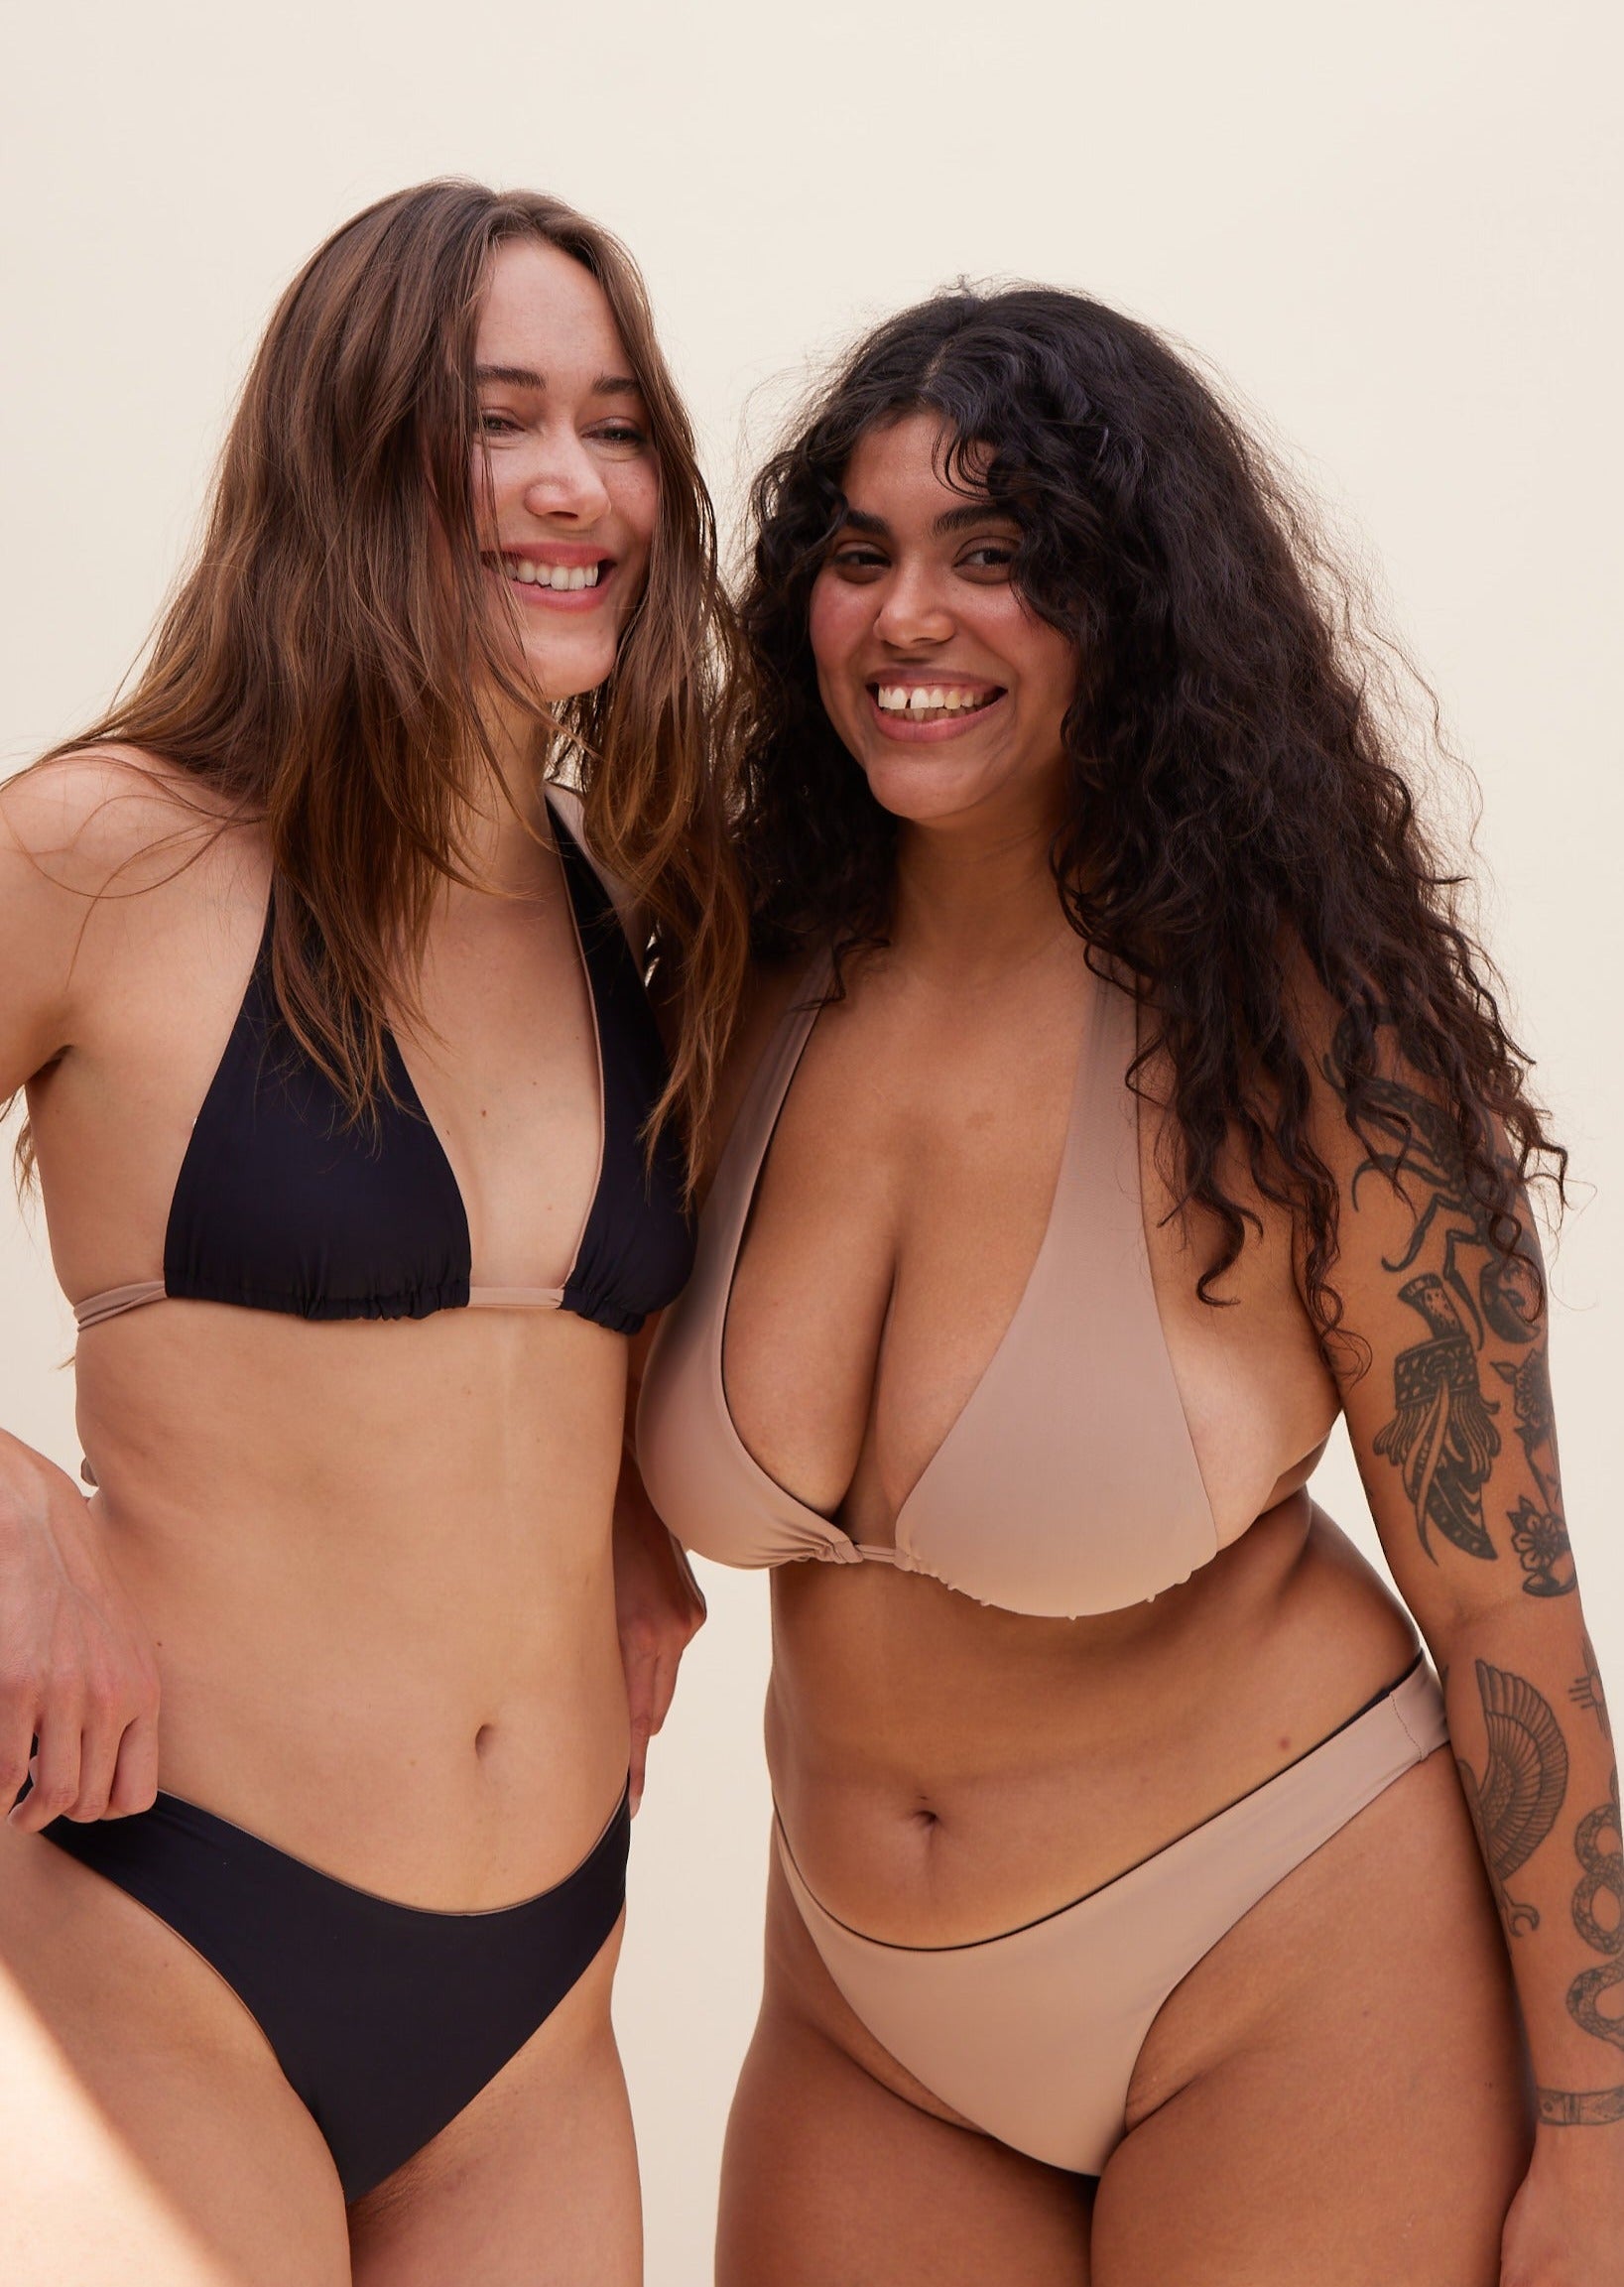 Front views of models wearing Reversible Koloa Top in dune color. Showcasing both tan and black styles